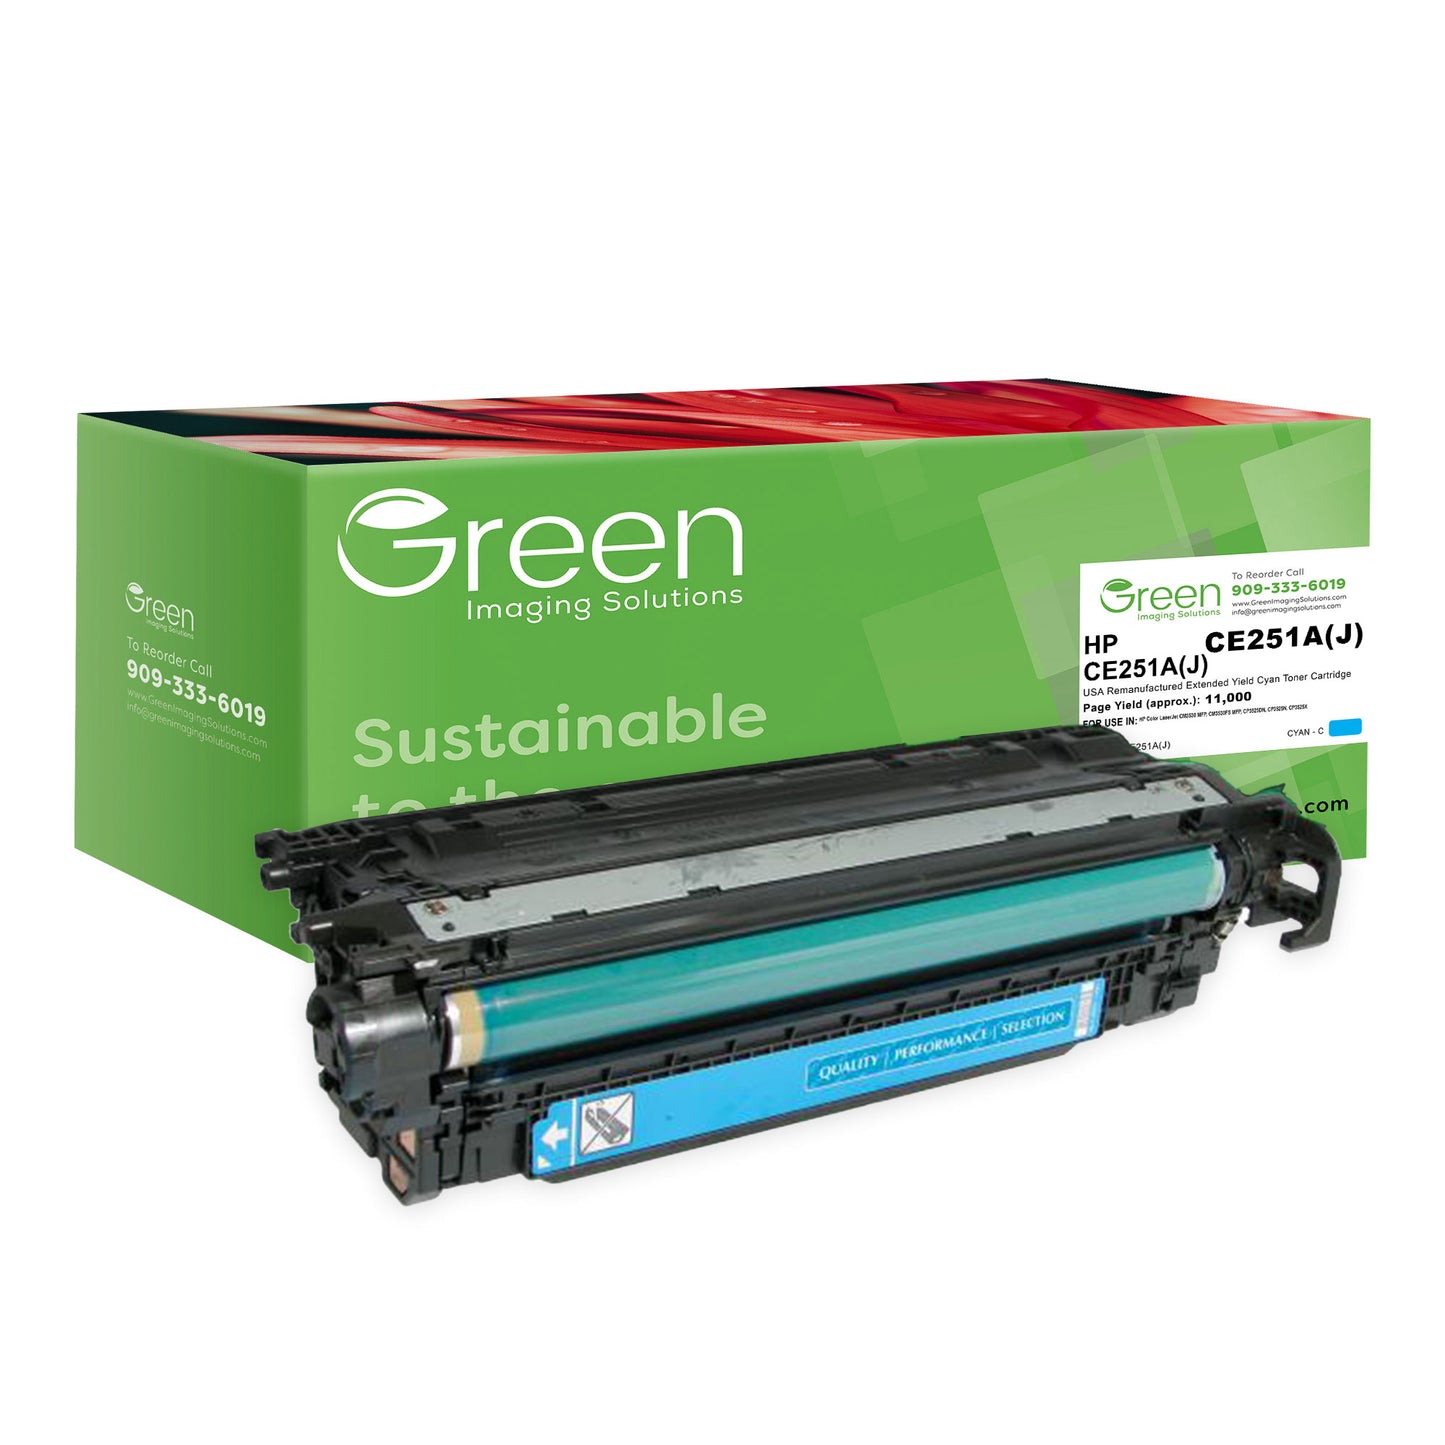 GIS USA Remanufactured Extended Yield Cyan Toner Cartridge for HP CE251A